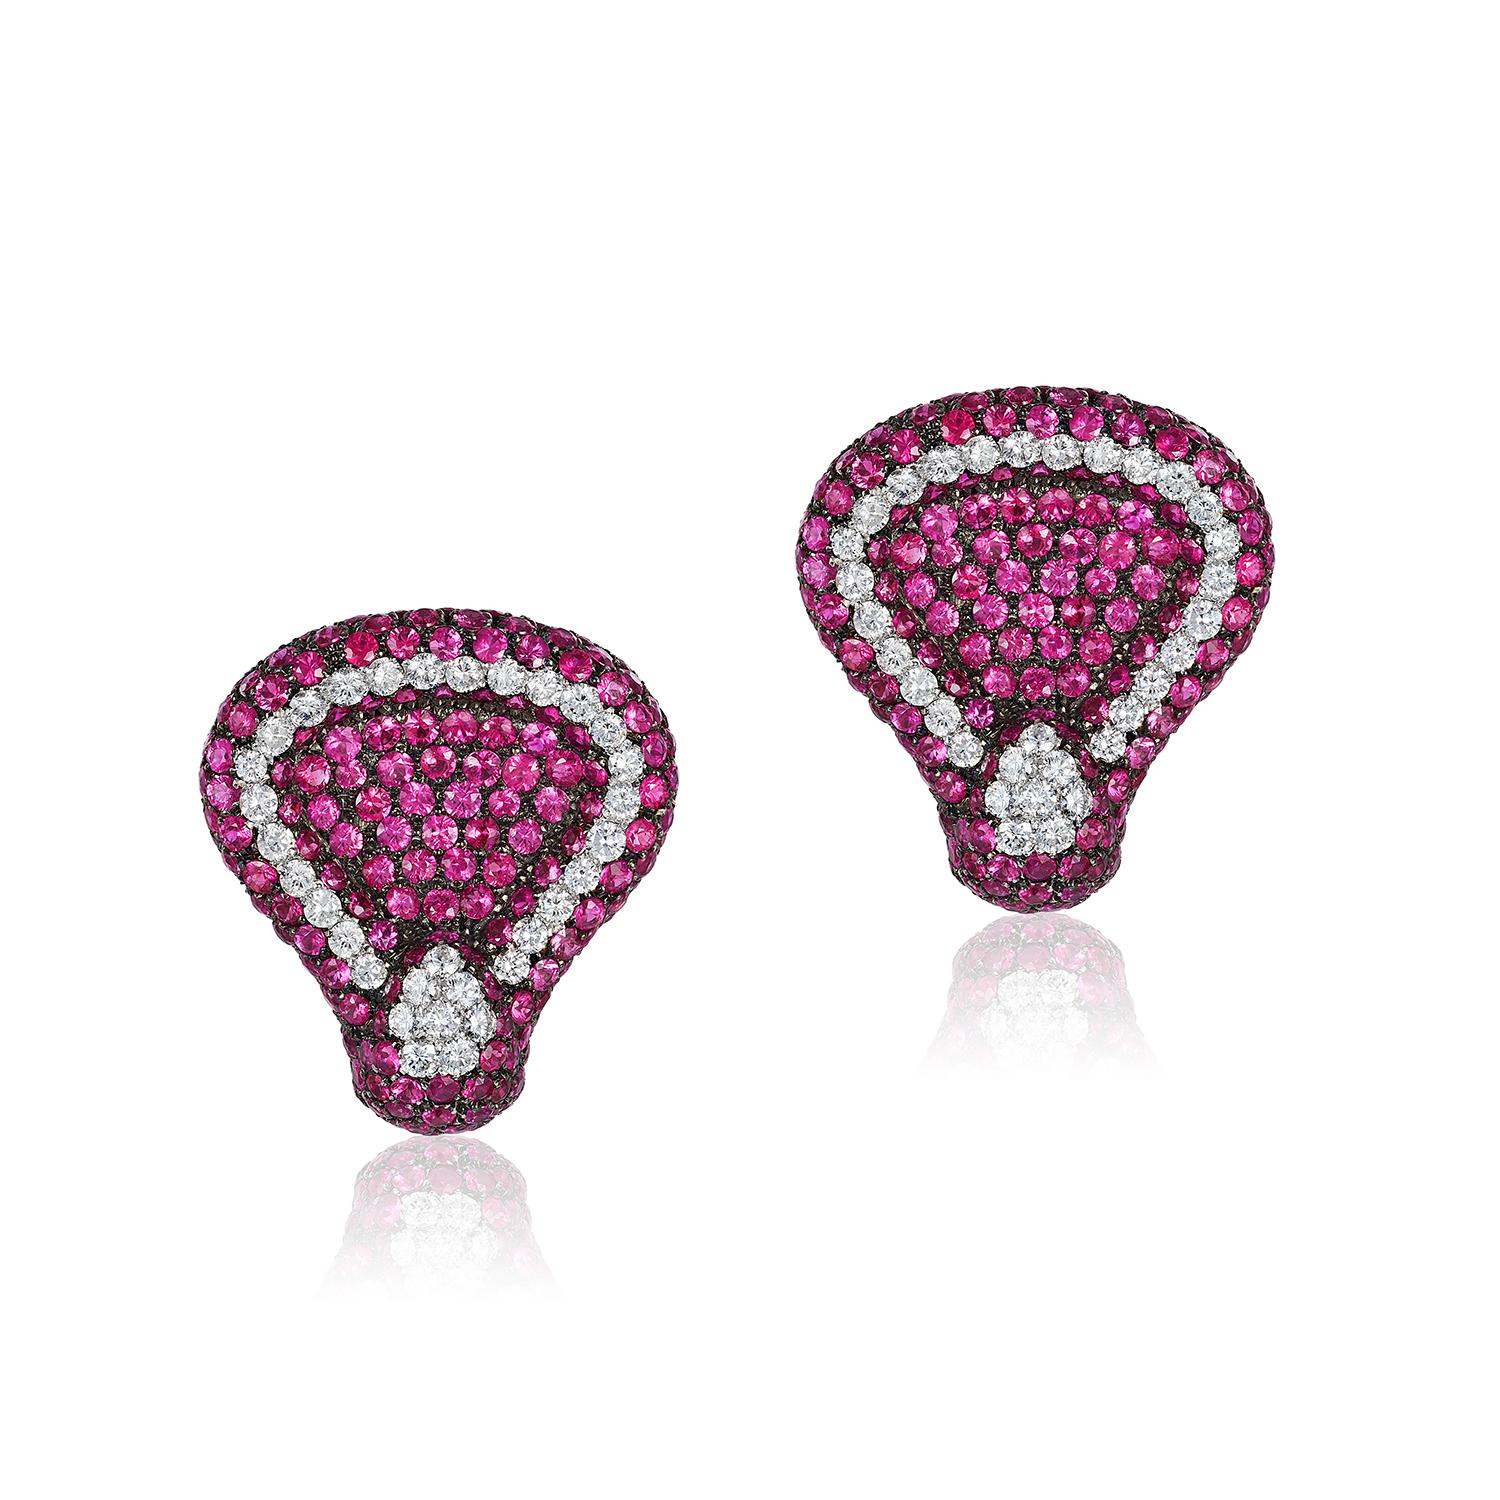 Andreoli Pink Sapphire Diamond On Ear Clip Earrings 18KT White Gold Blackened

These earrings feature 12.86 carats of full cut round Pink Sapphires accented by 2.37 carats of full cut round brilliant diamond  F/G/H Color VS-SI Clarity. set in 30.70